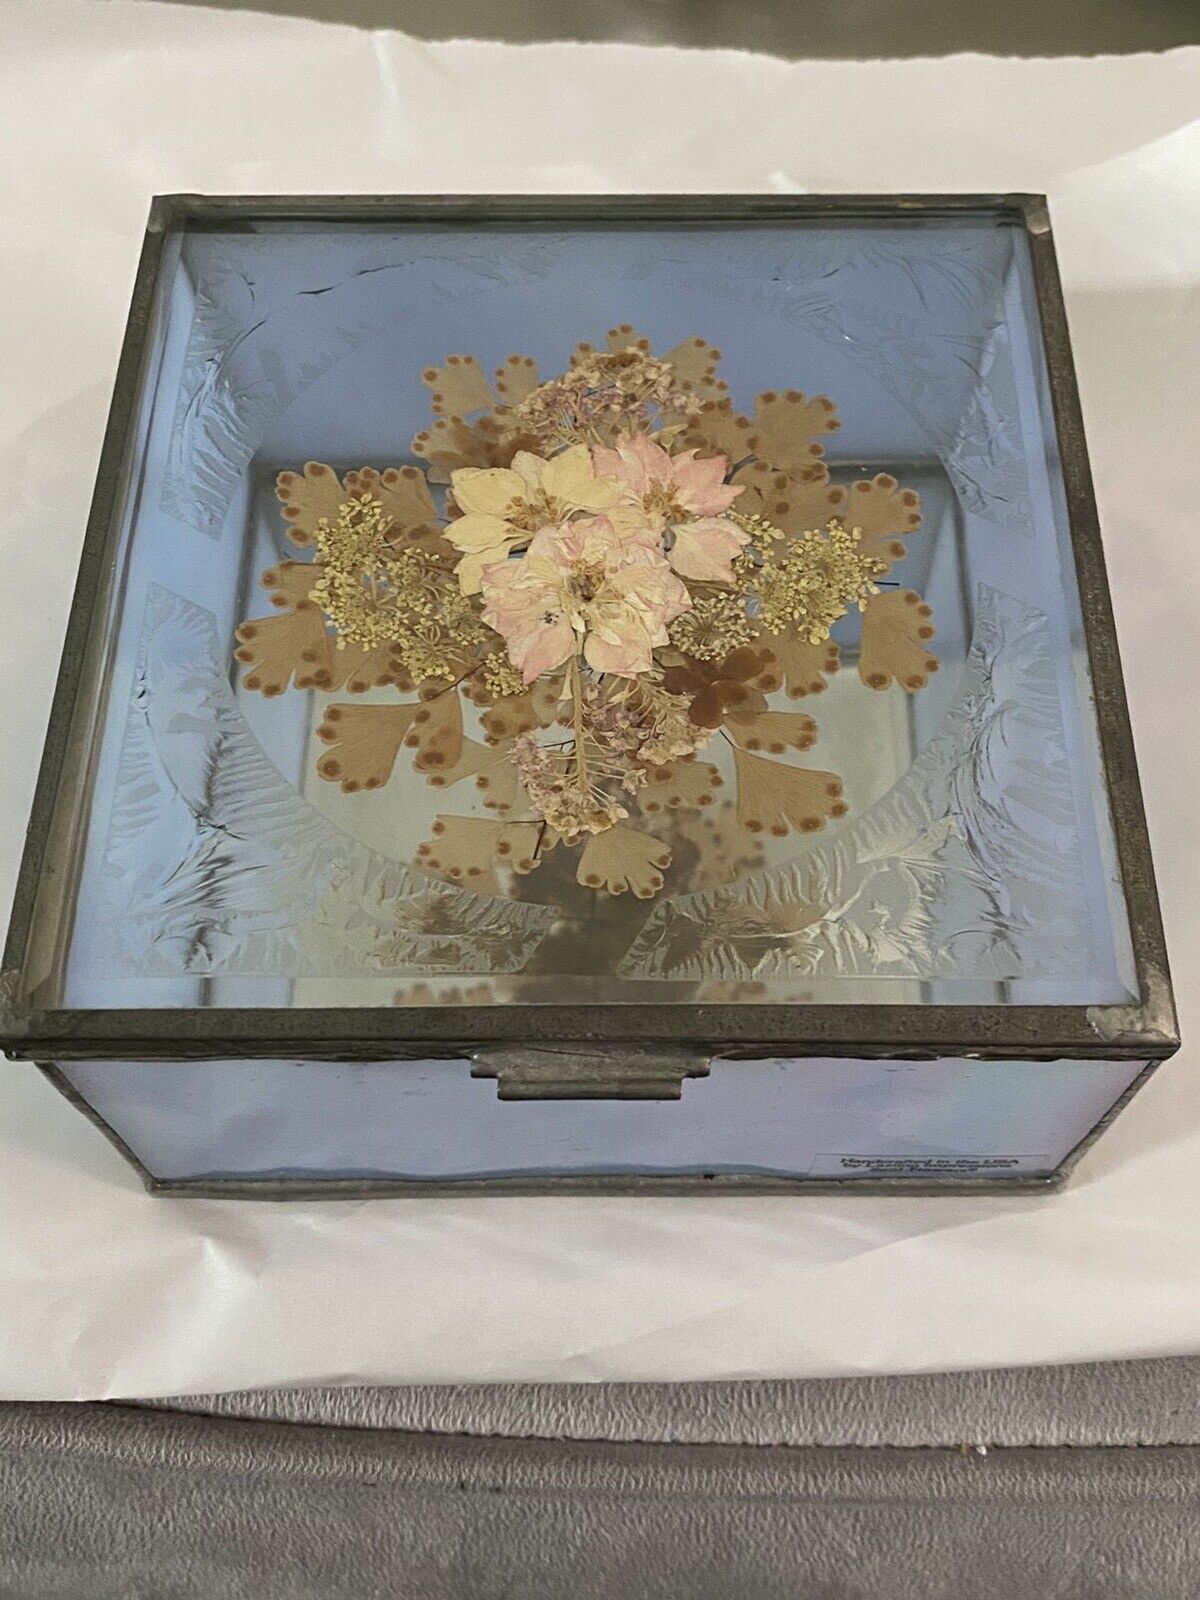 Gorgeous Vintage Pressed Flowers Glass Jewelry Box By Lasting Impressions